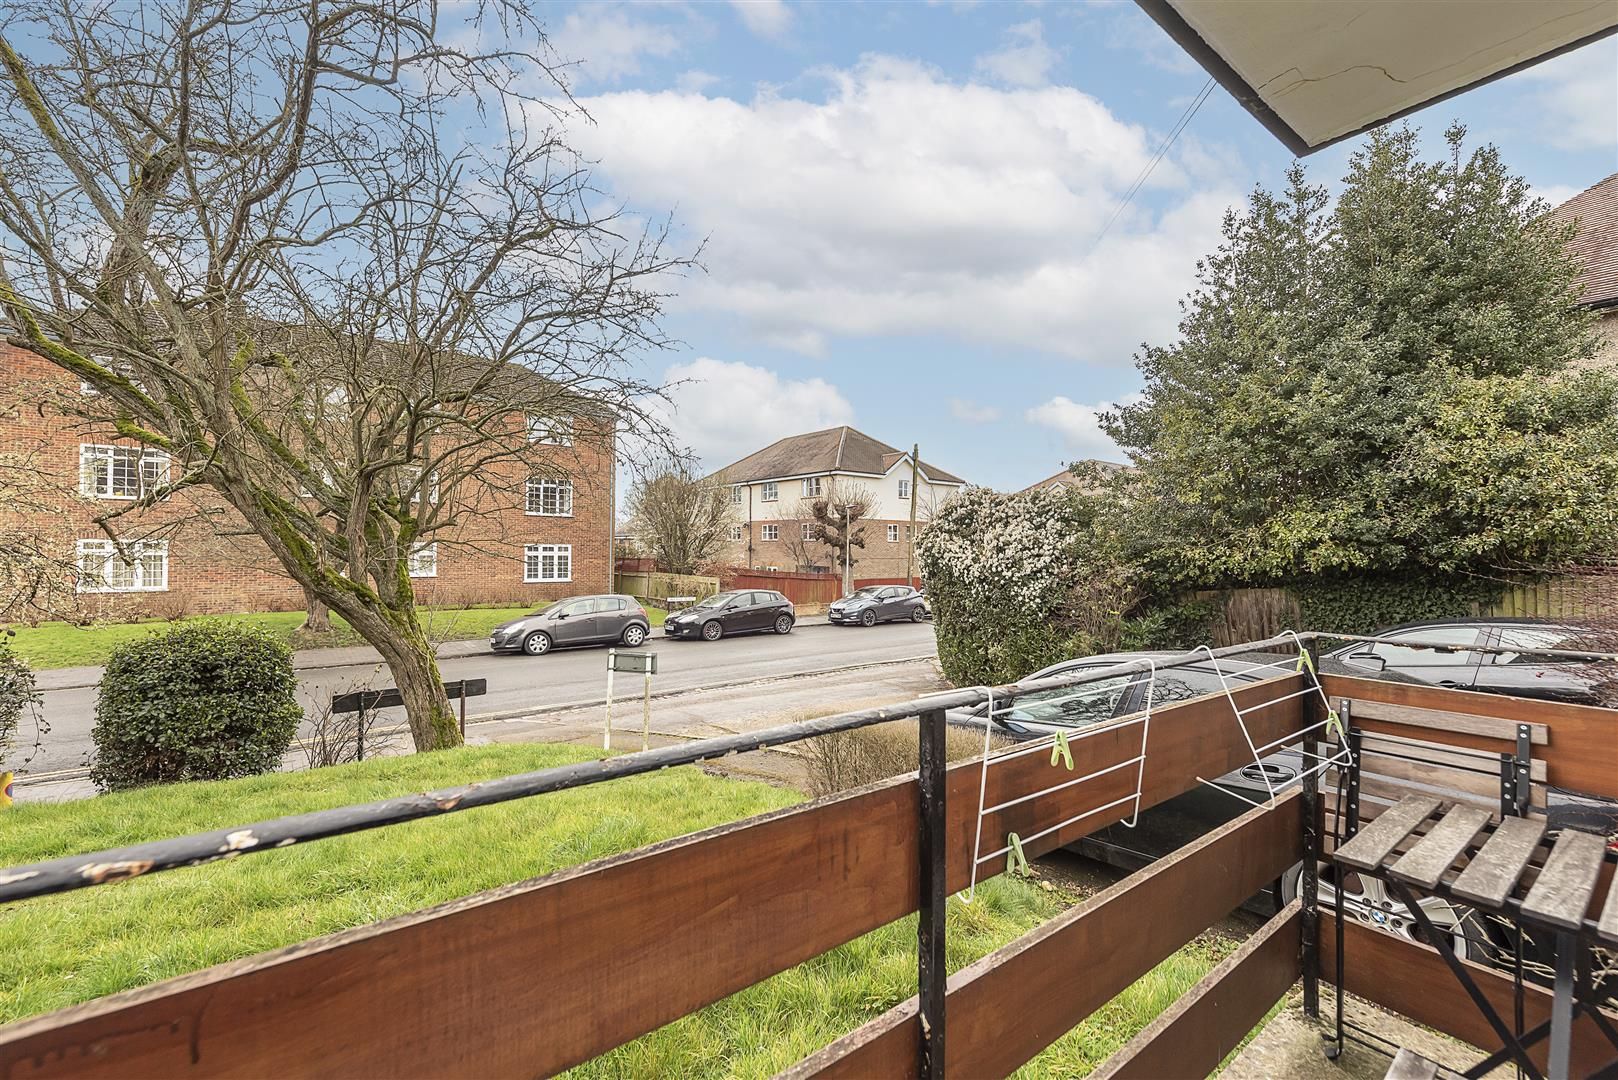 2 bed flat for sale in Avenue Road, St.Albans AL1 - Zoopla